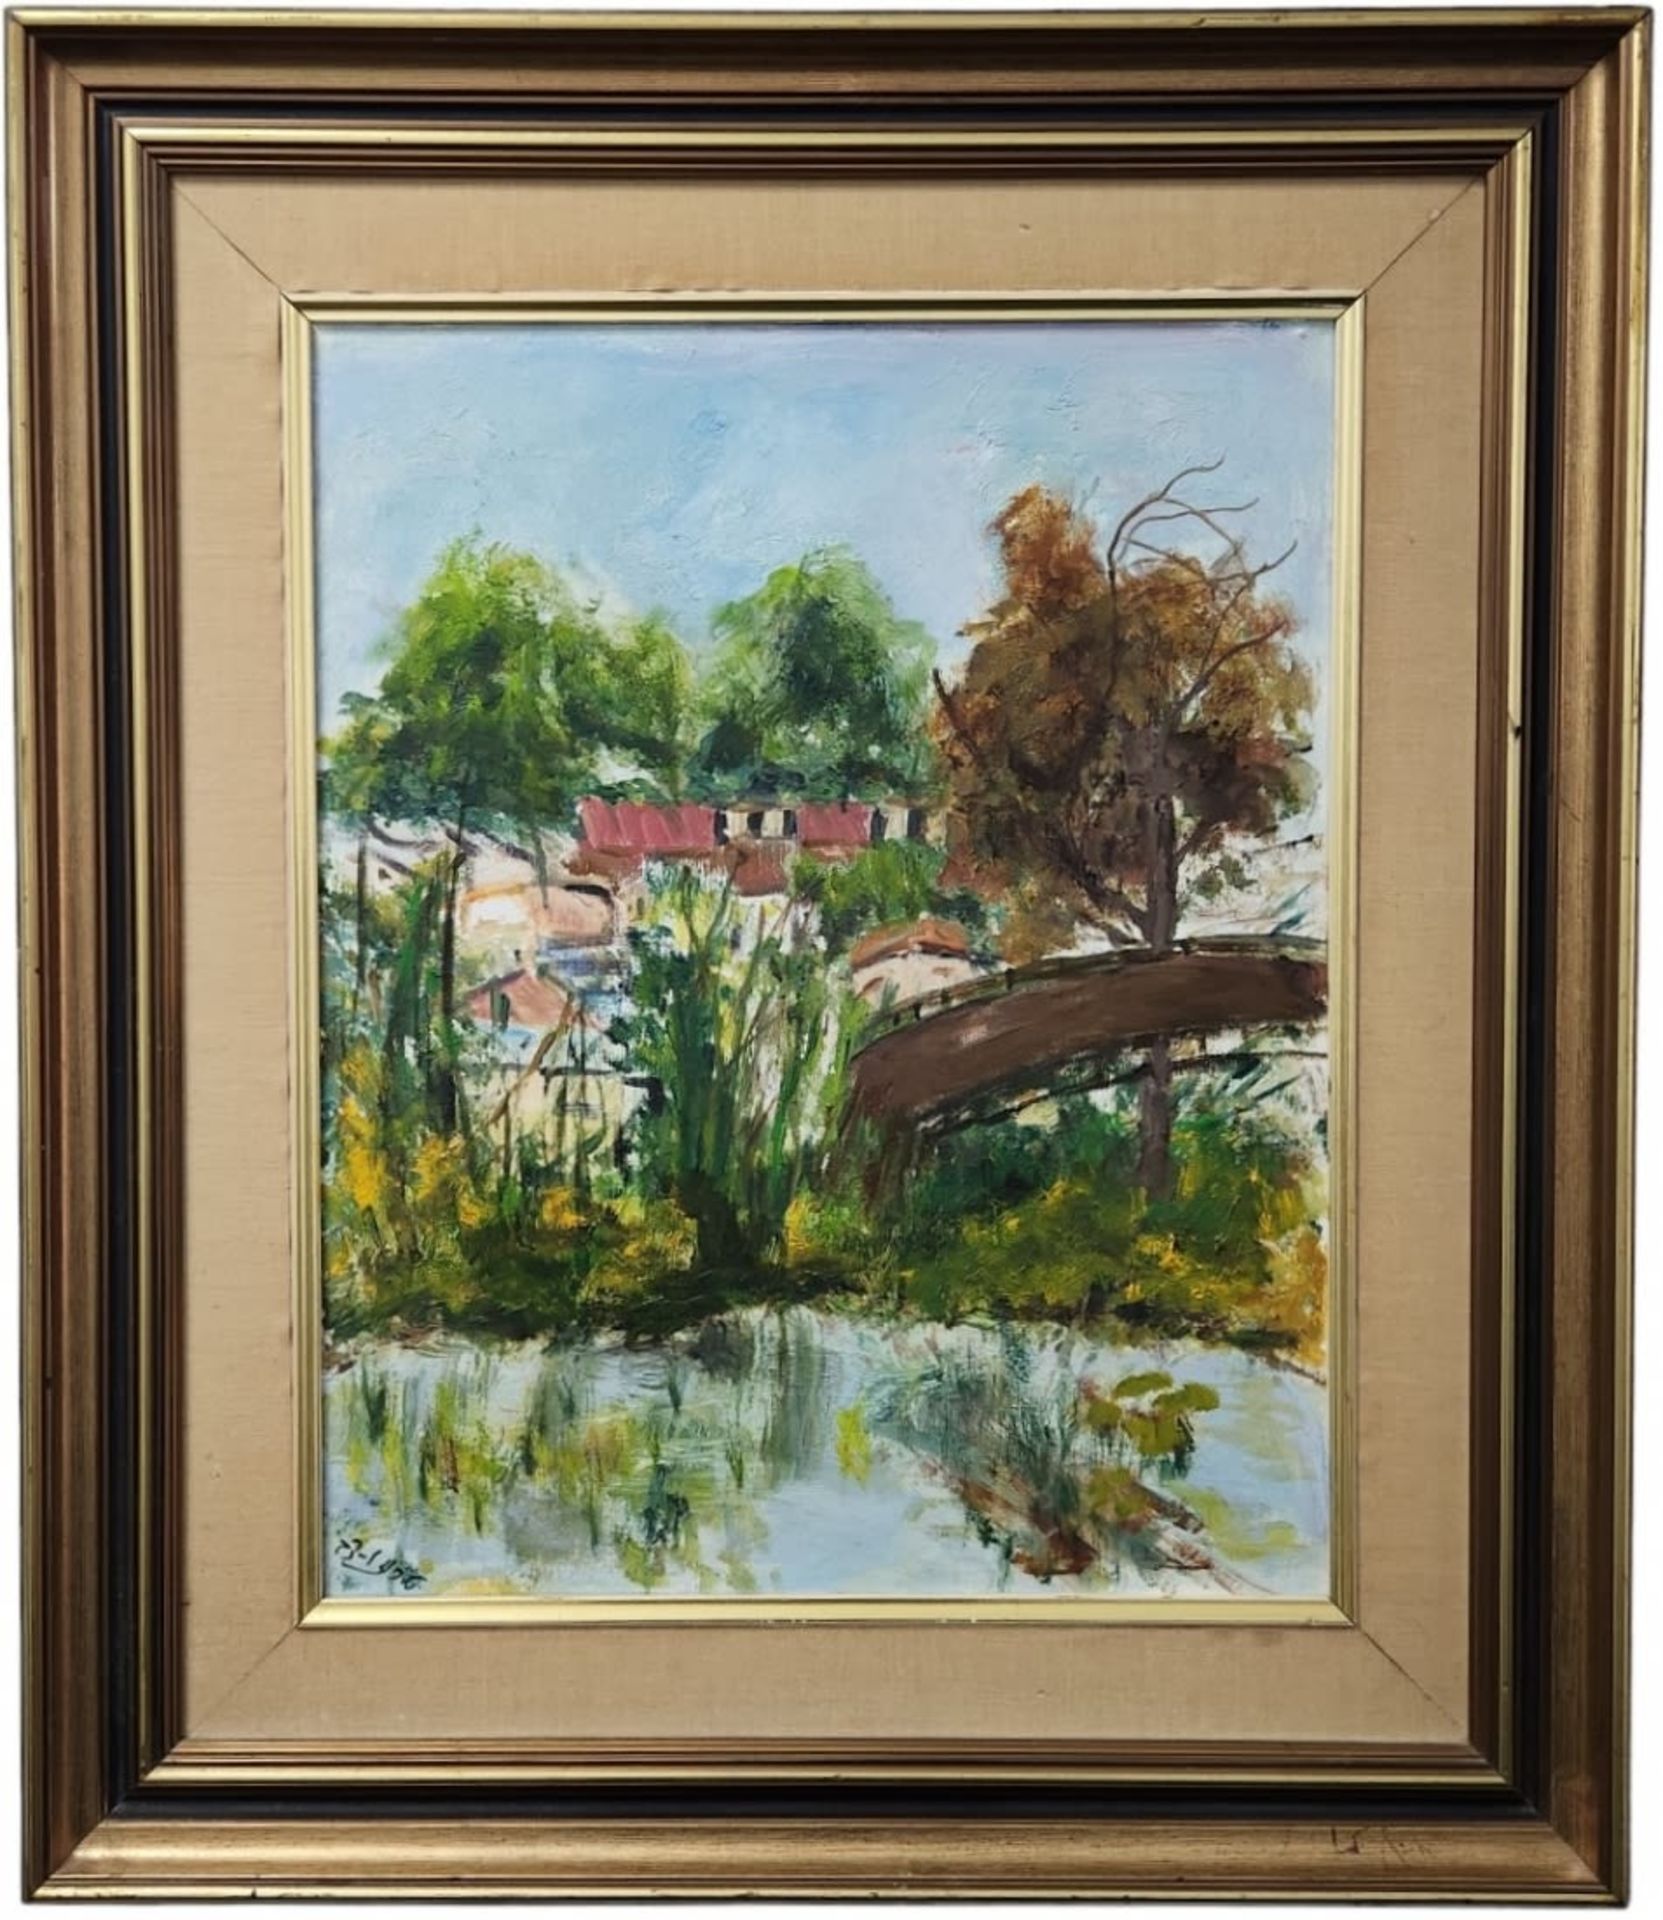 'Red tiled roofs between the trees' - painting, tova Rozen Zvi - oil on canvas, signed T. Rozen - - Image 2 of 5